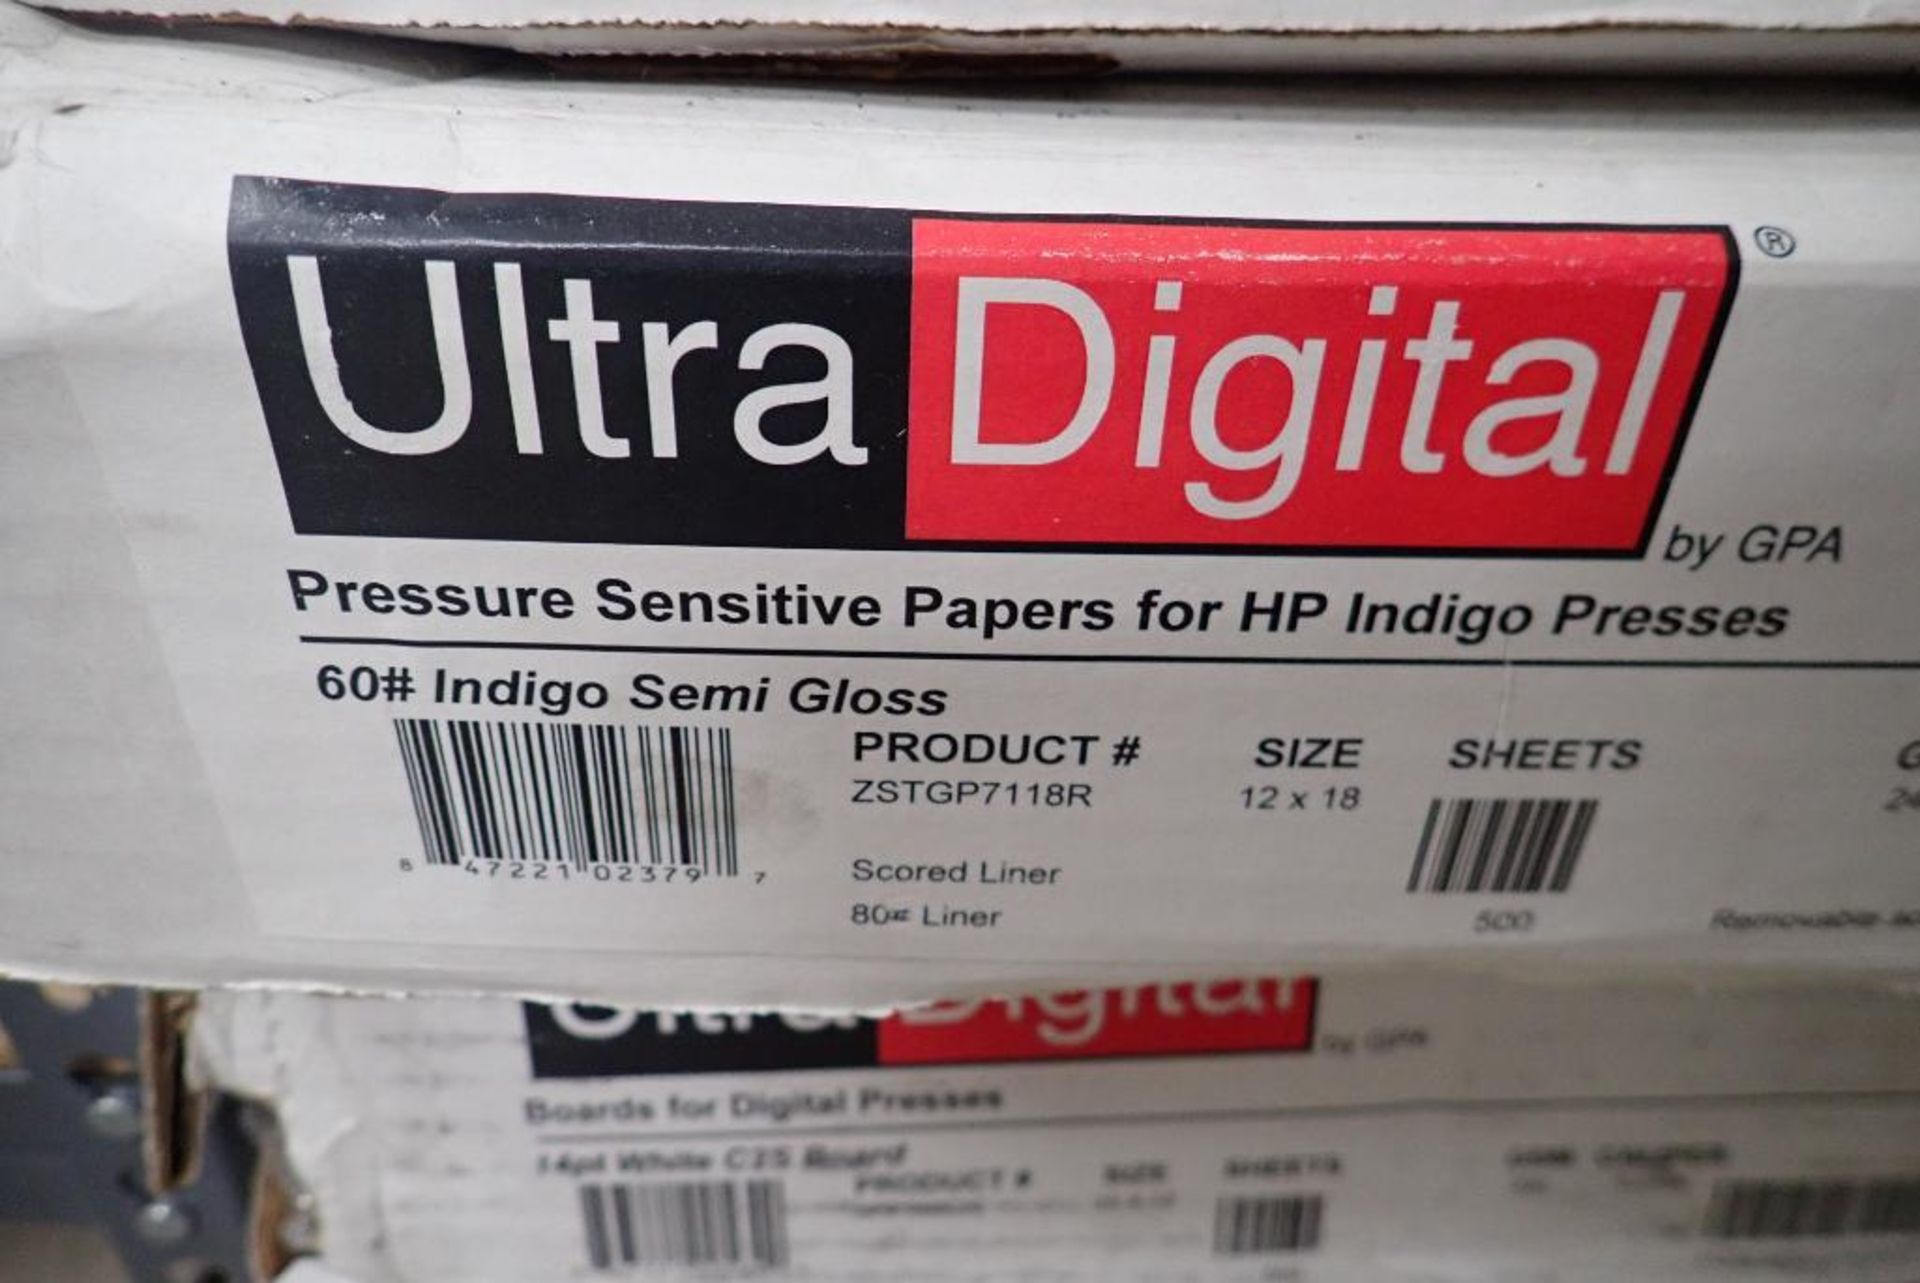 Lot of Approx. (12) Cases Asst. Size Ultra Digital Specialty Paper for Digital Presses. - Image 4 of 13